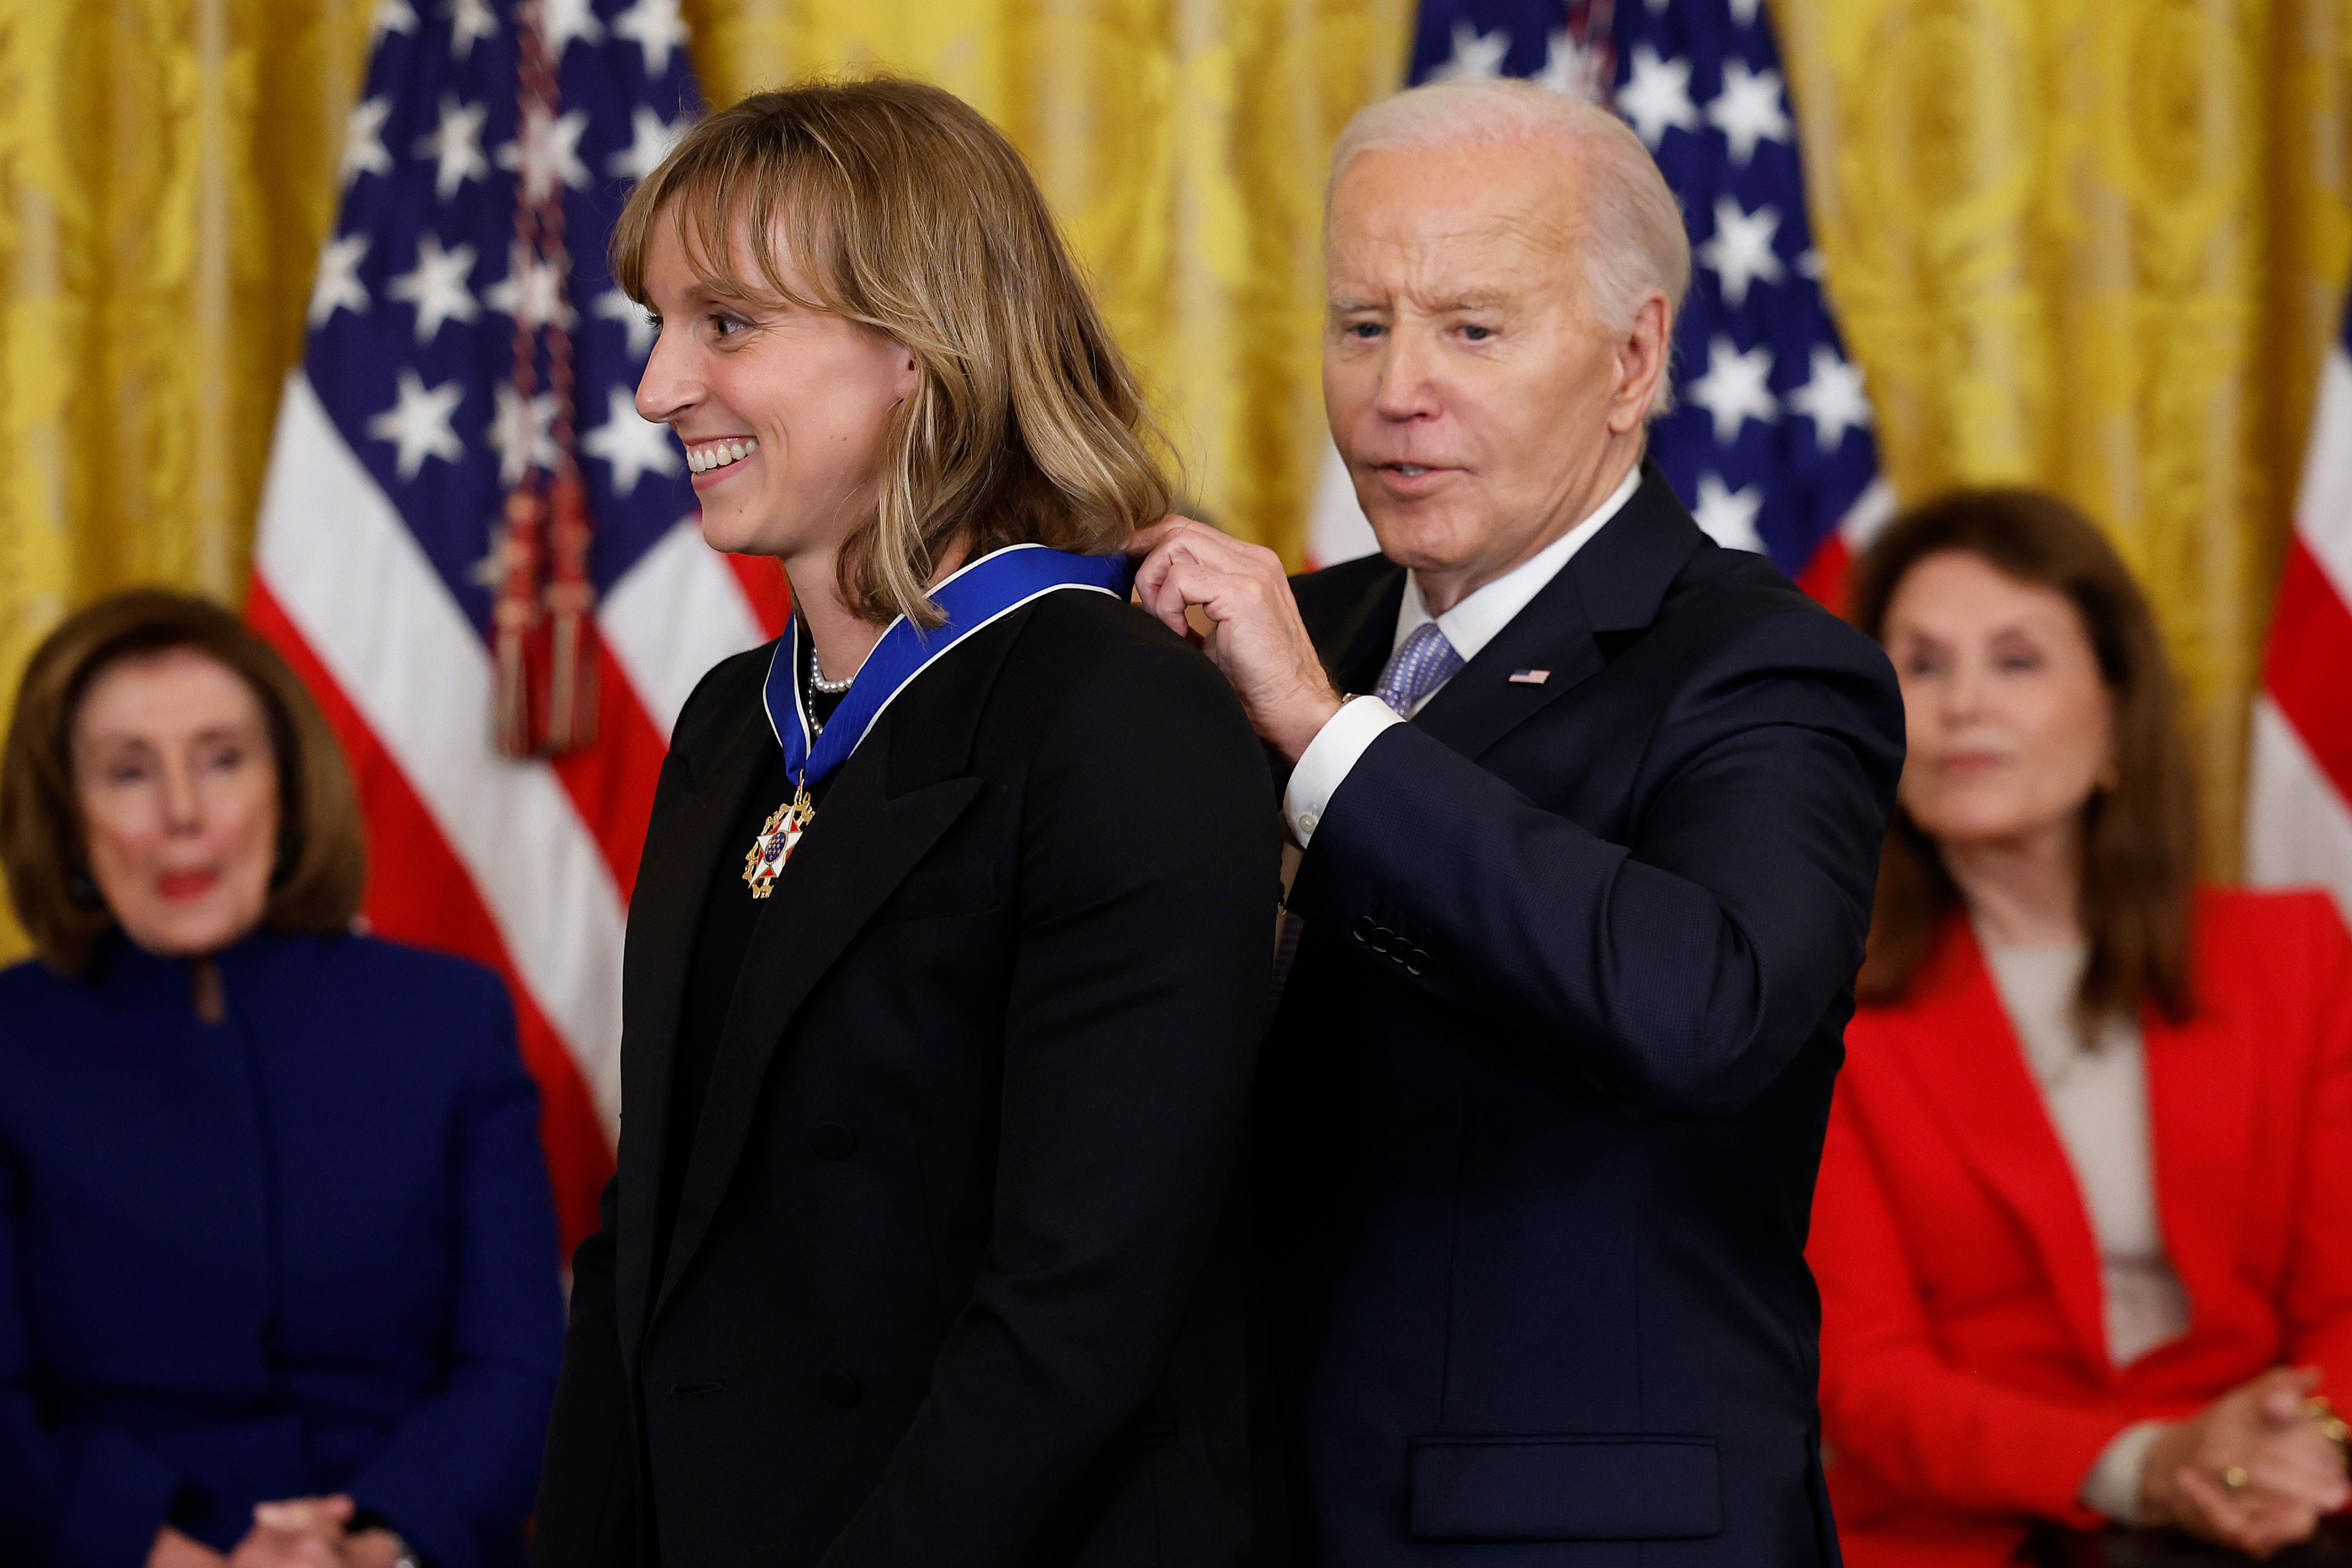 biden awards medal of freedom to 19 people including nancy pelosi, al gore and michelle yeoh